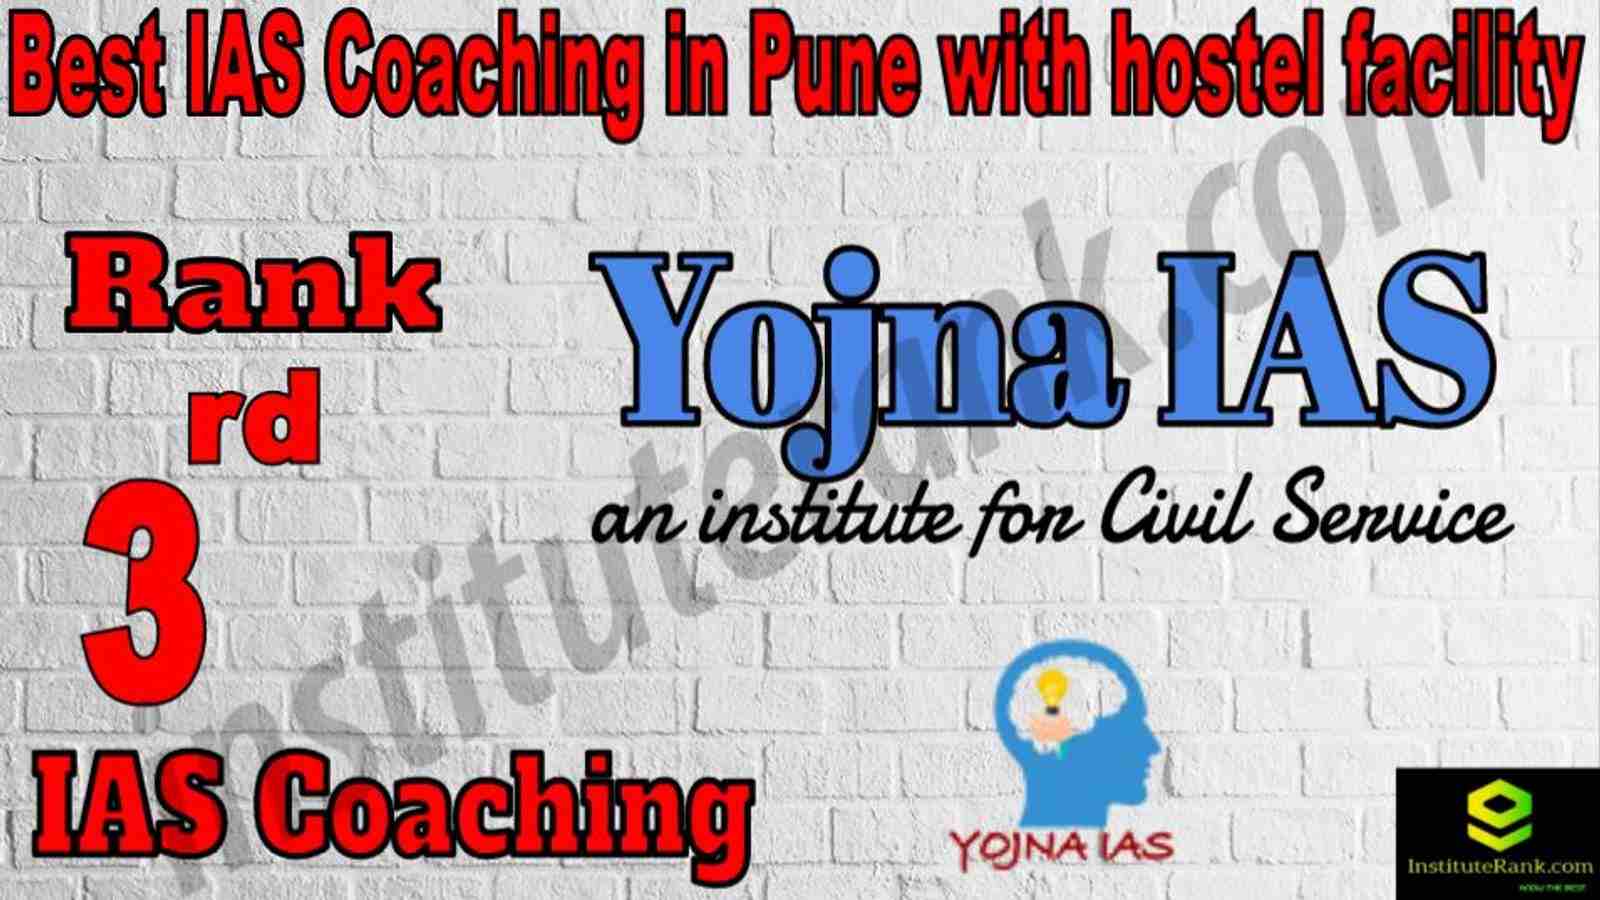 3rd Best IAS Coaching in Pune with hostel facility